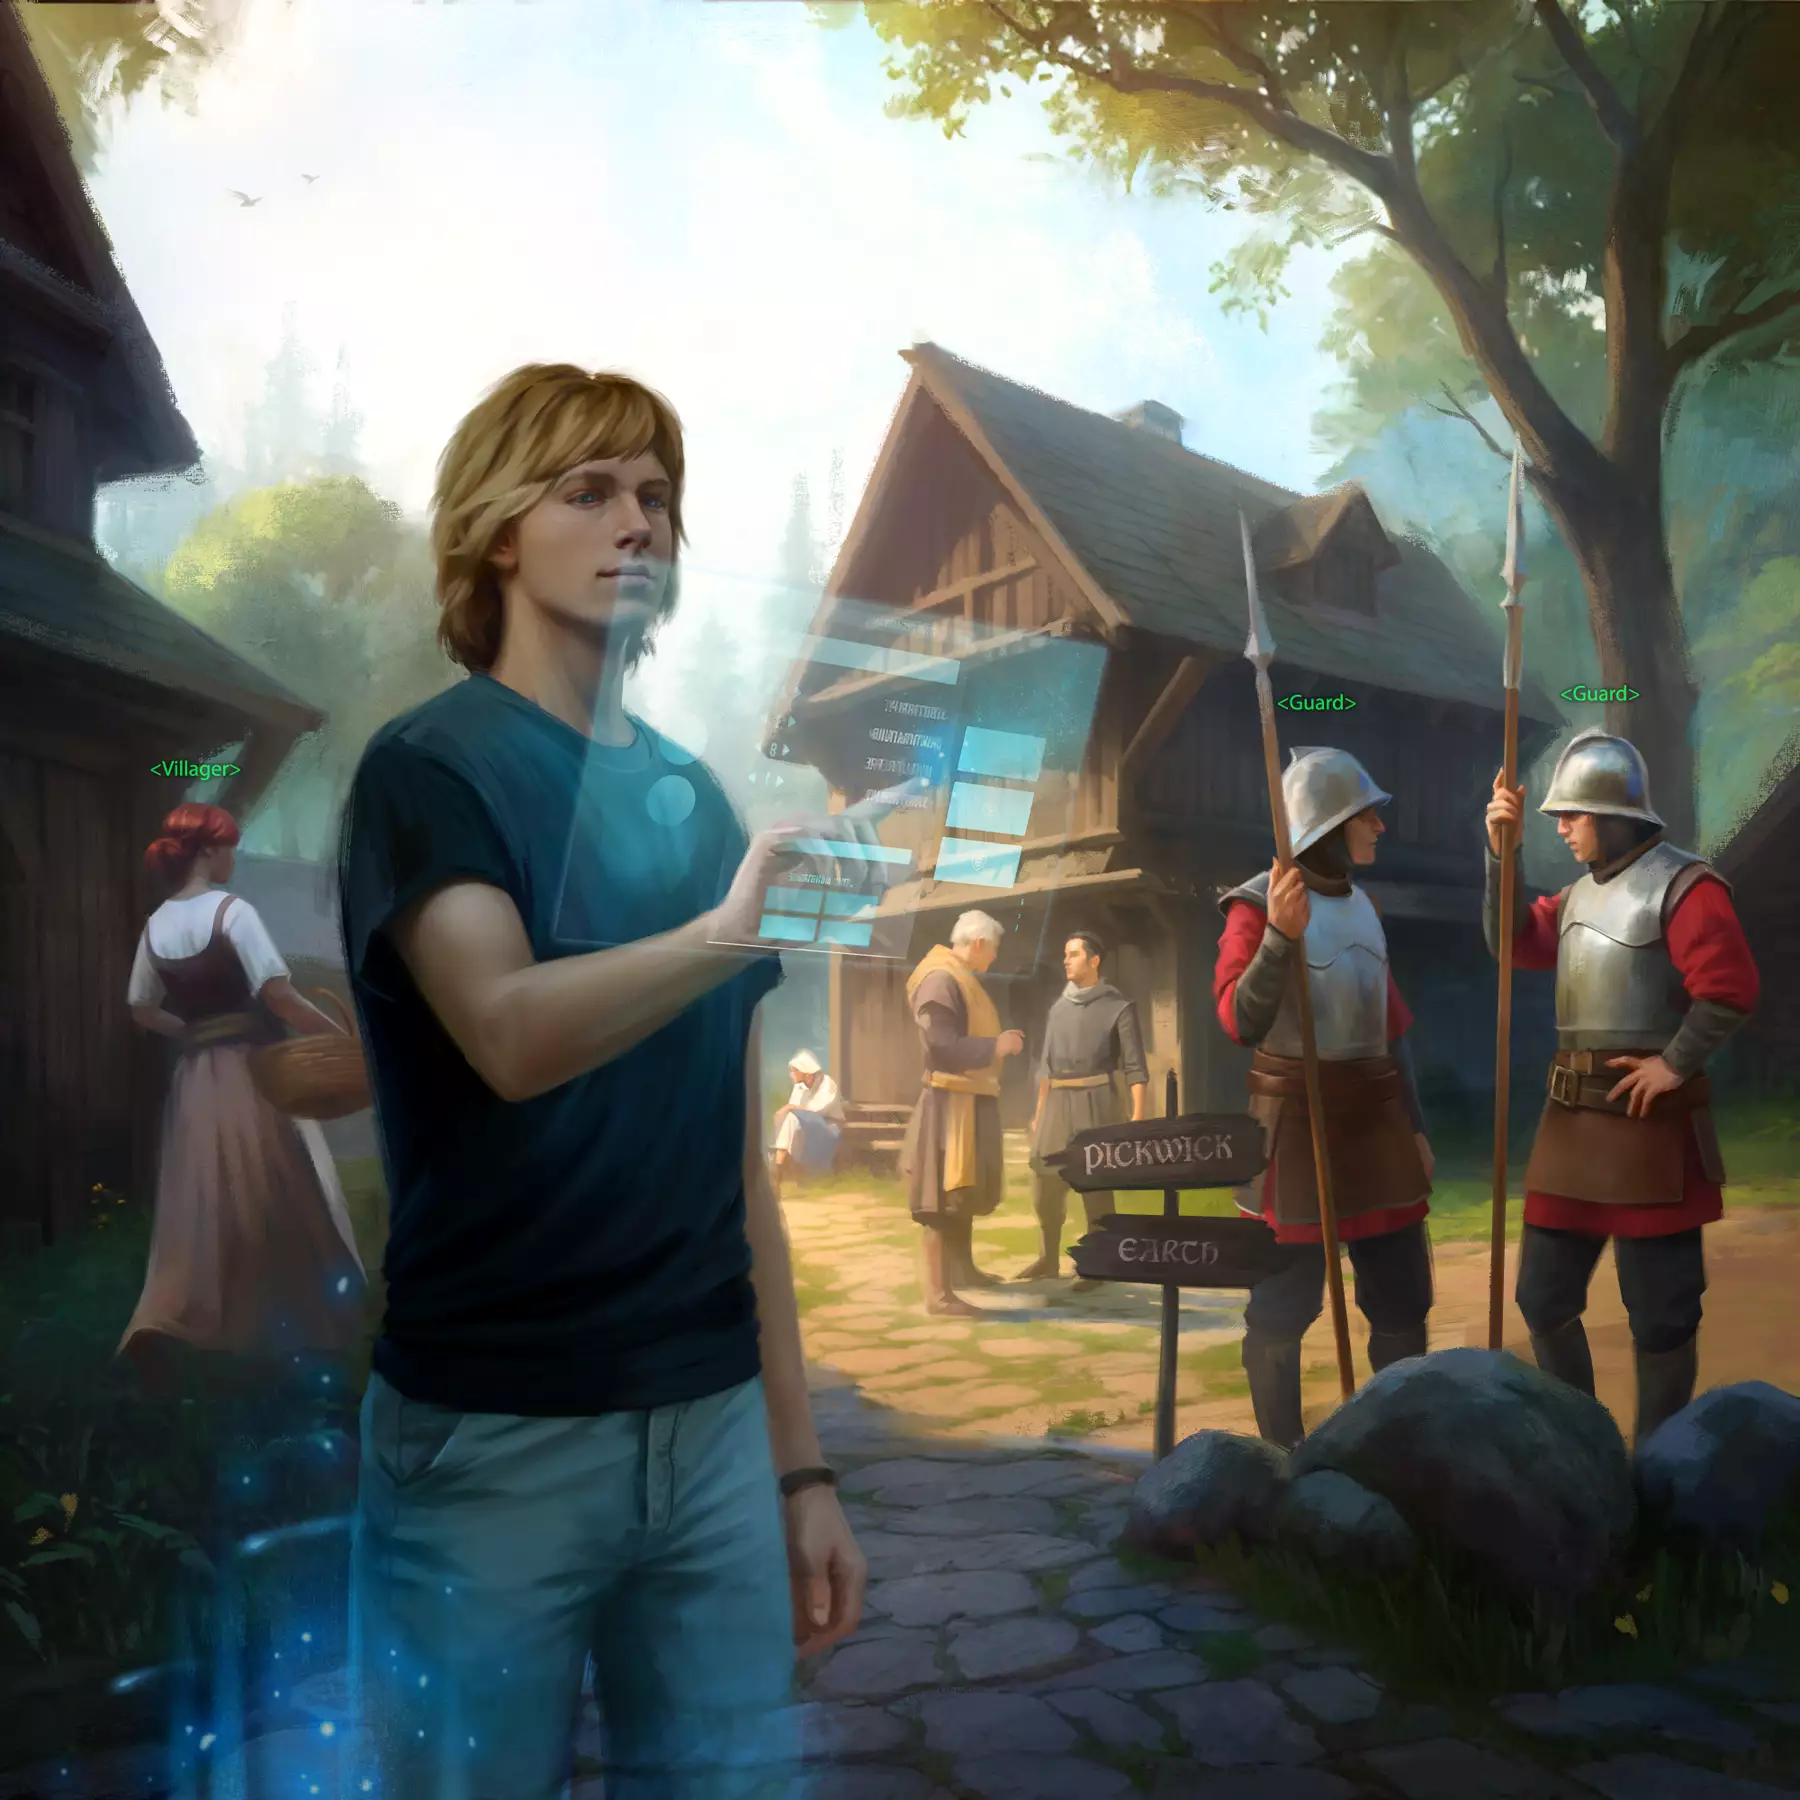 A young man wearing modern clothes standing in a fantasy village interacts with a floating futuristic configuration screen in front of him.